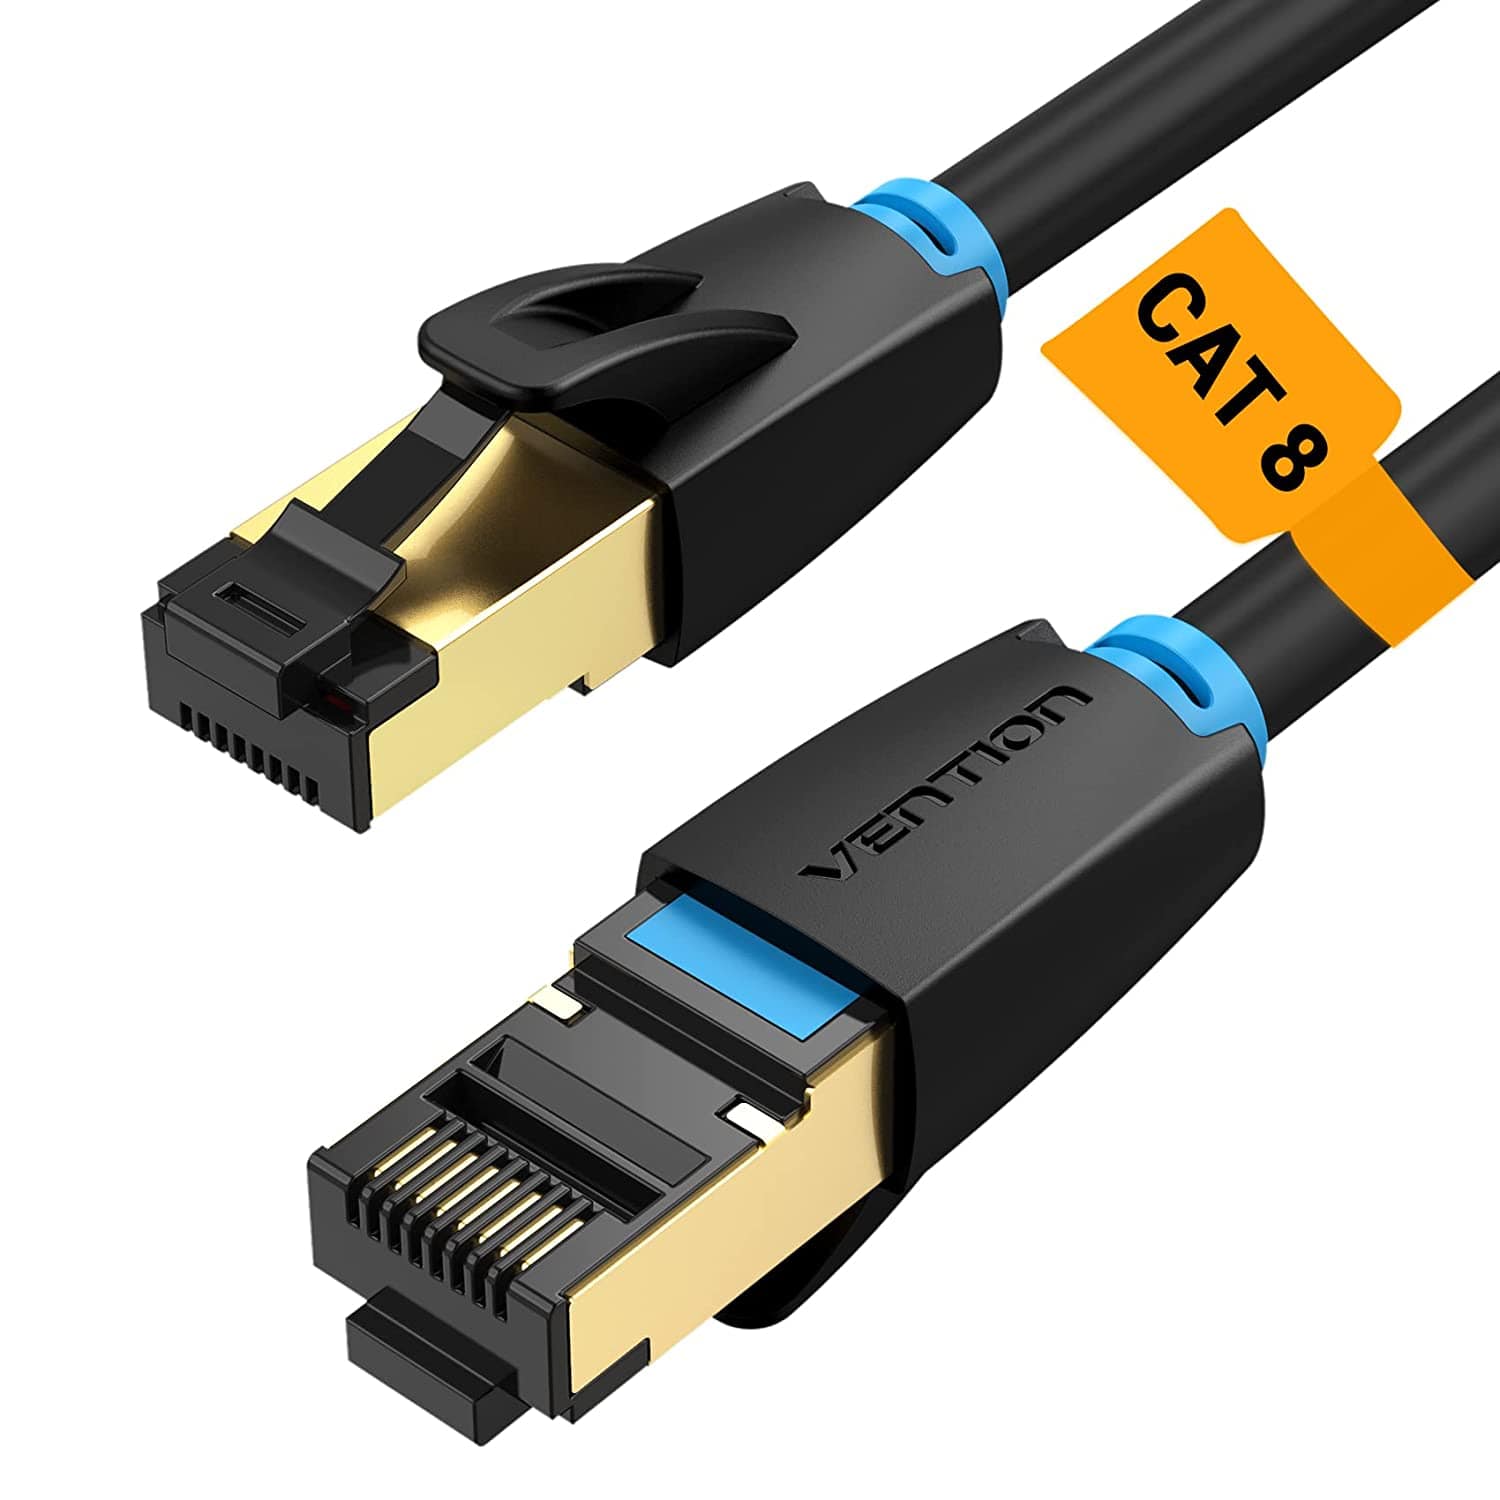 Ugreen 30795 Cat 8 Ethernet Cable 10m Price in Pakistan